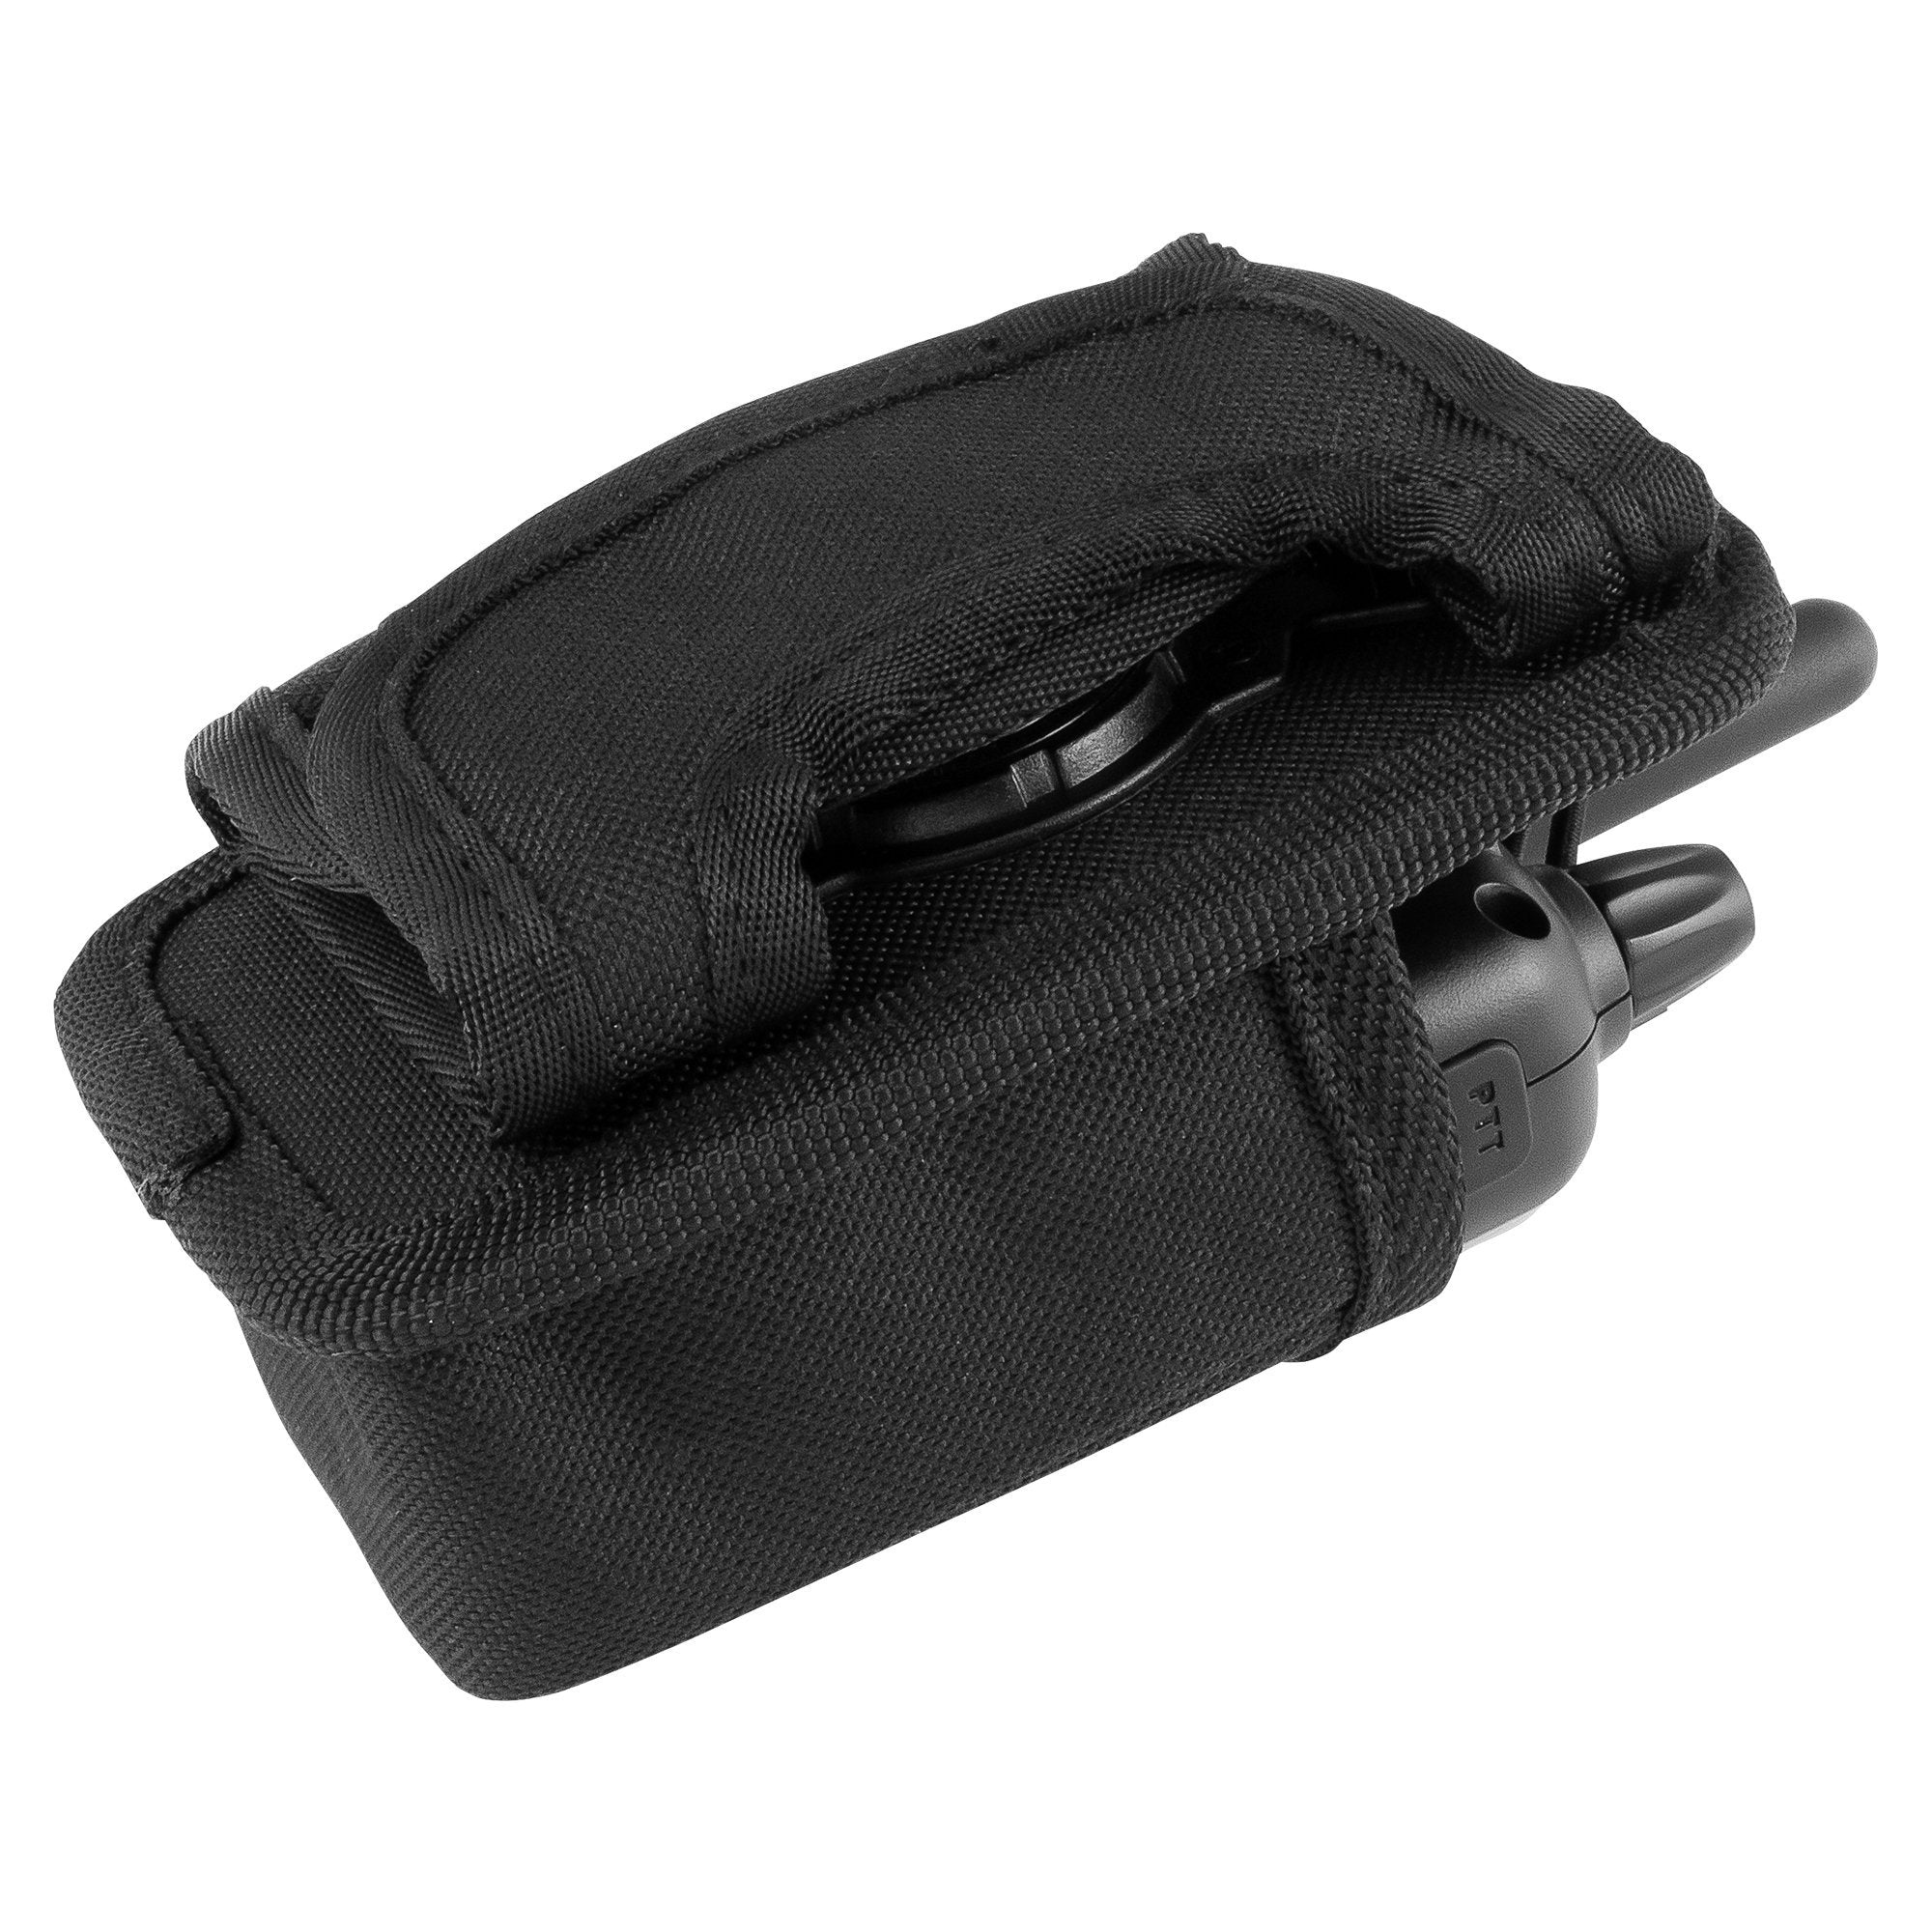 Tactical Universal Radio Holster/Radio Pouch Holder Case Bag Military Molle  Radio Case for Pofung Motorola Midland CB Walkie Talkies Compatible with